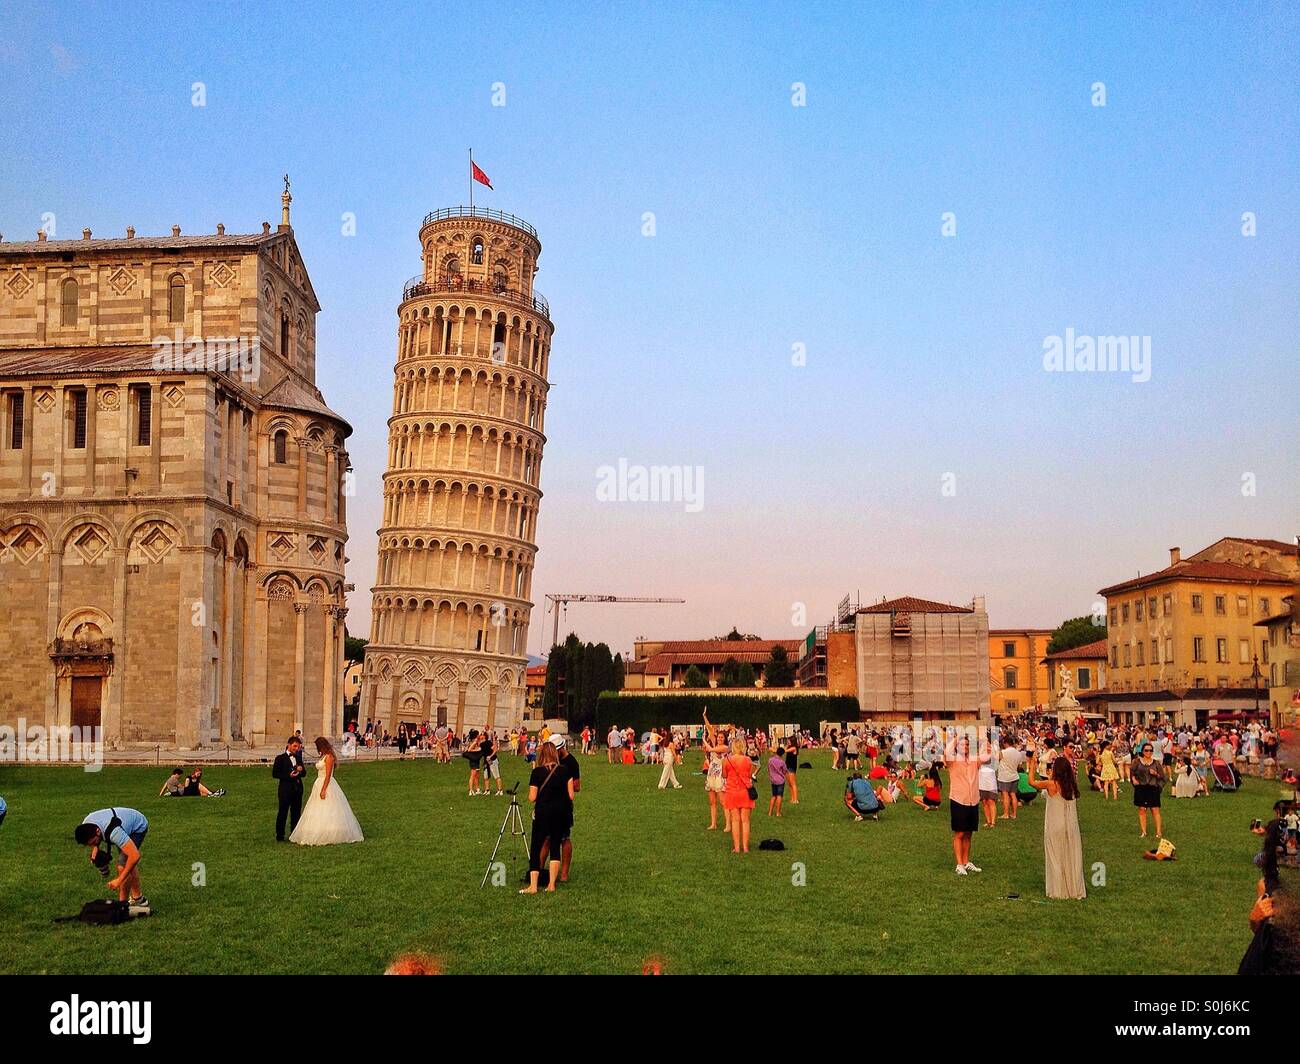 People visit the leaning tower of Pisa Italy Stock Photo